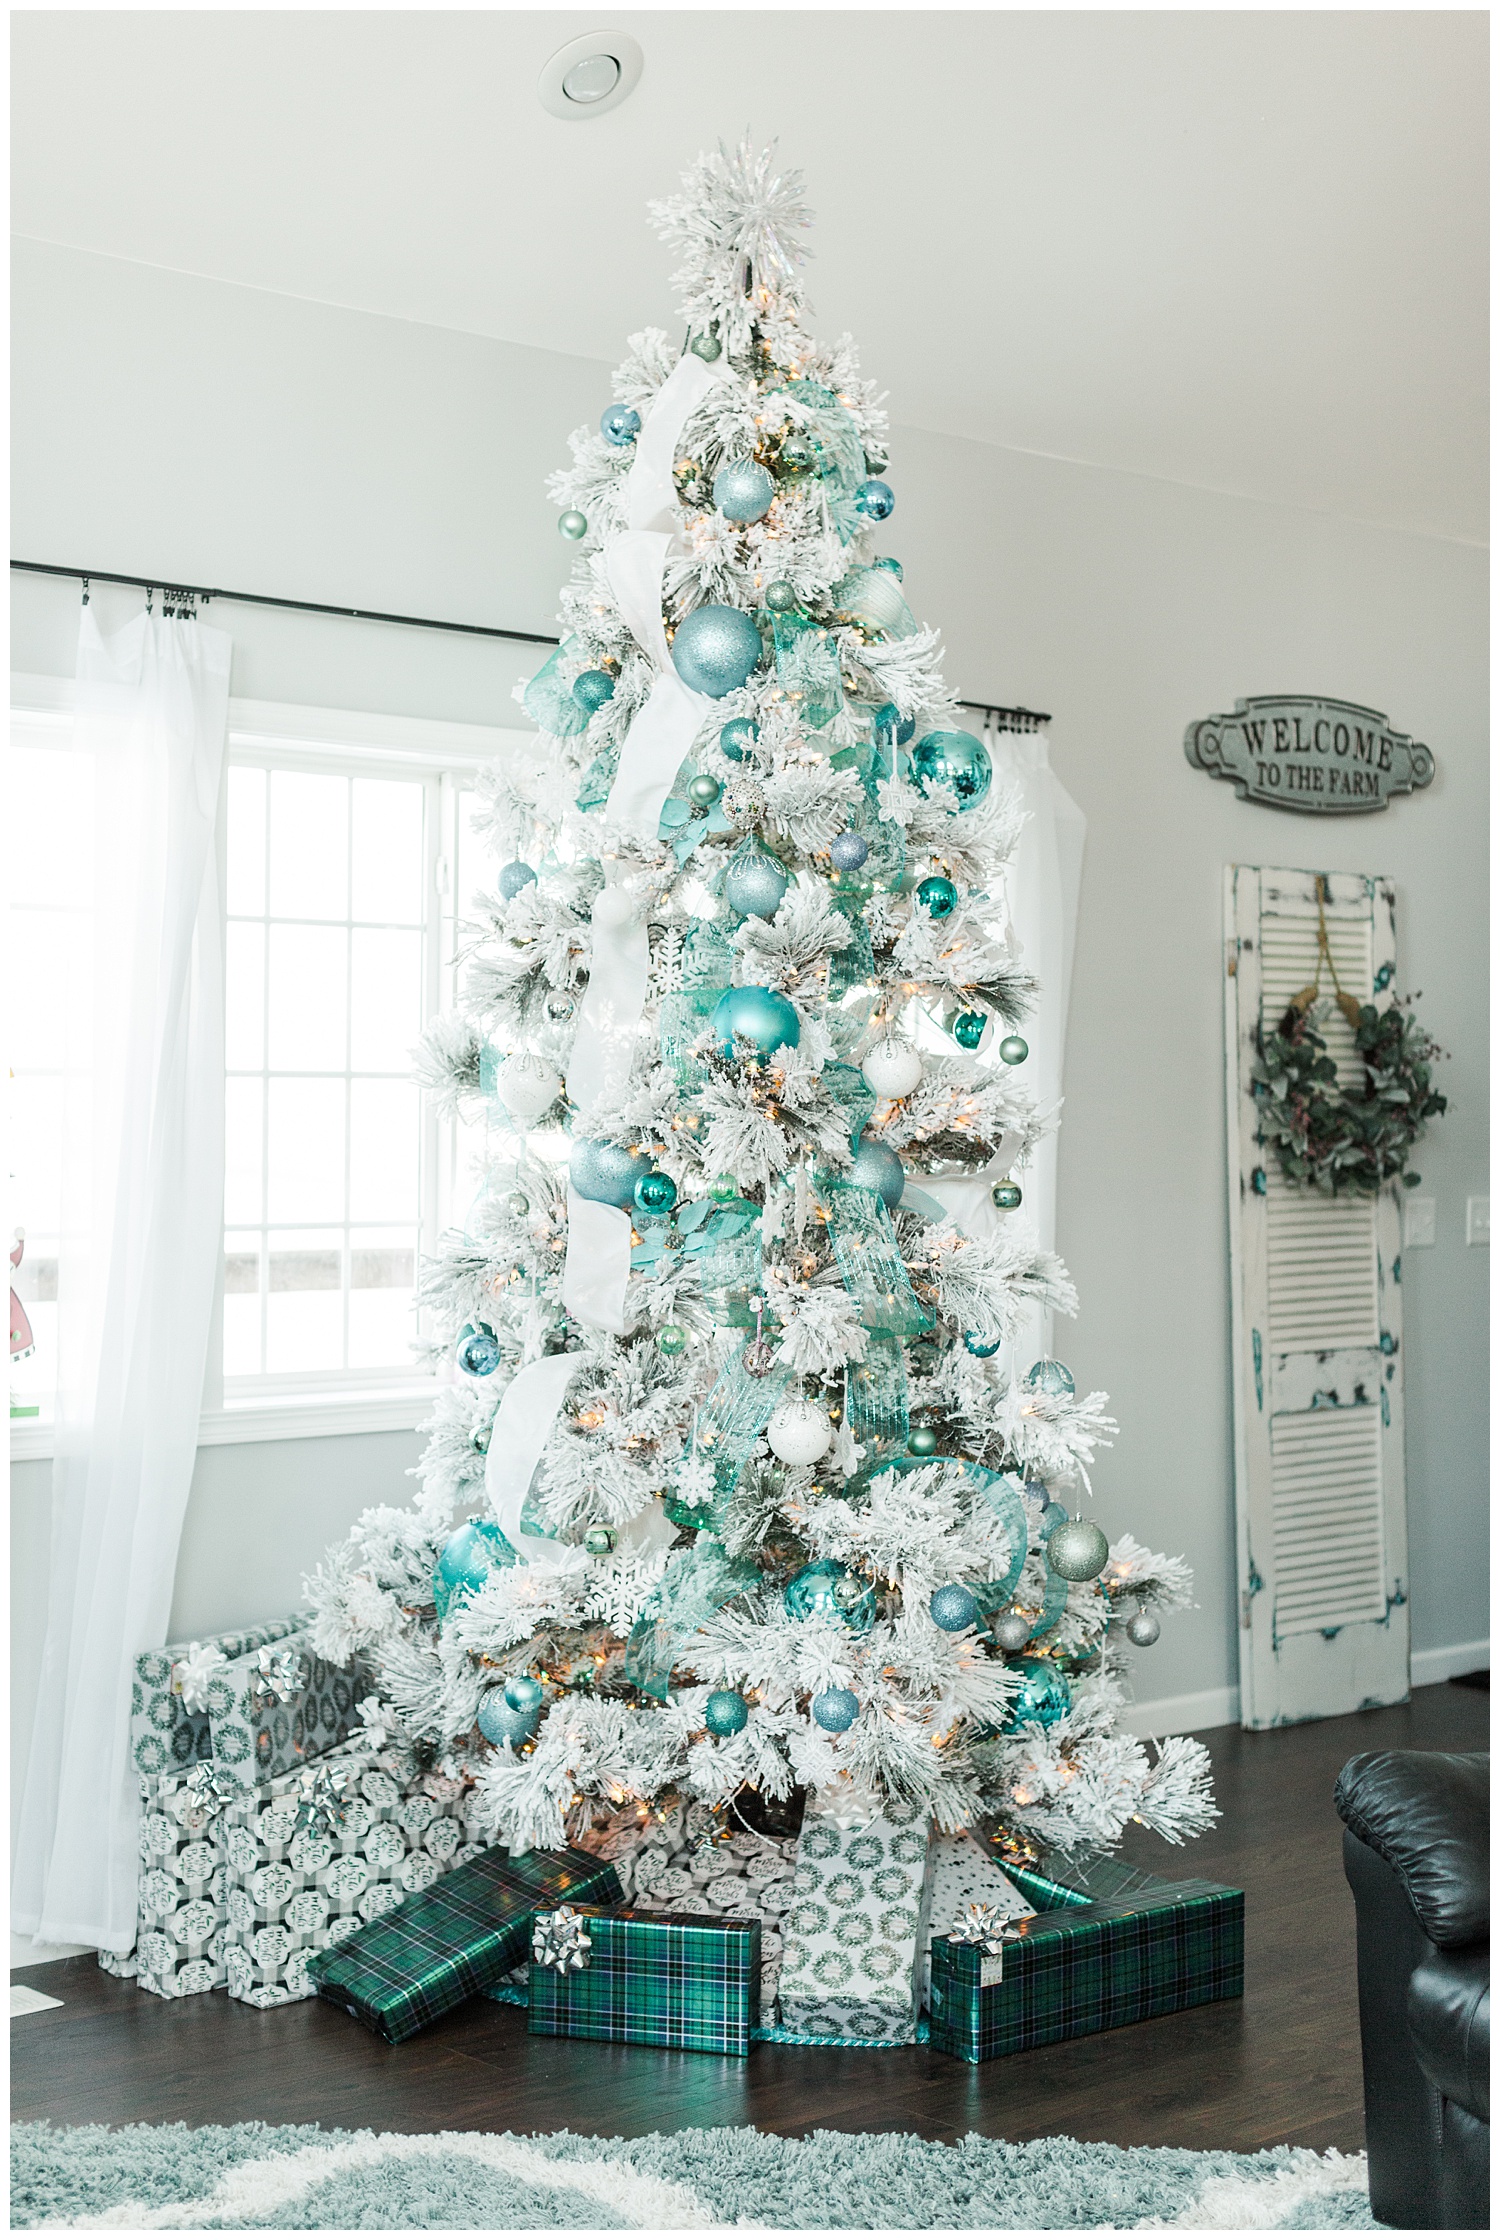 Flocked Christmas tree decorated with white and teal ribbon and teal, light blue and aqua ornaments | CB Studio